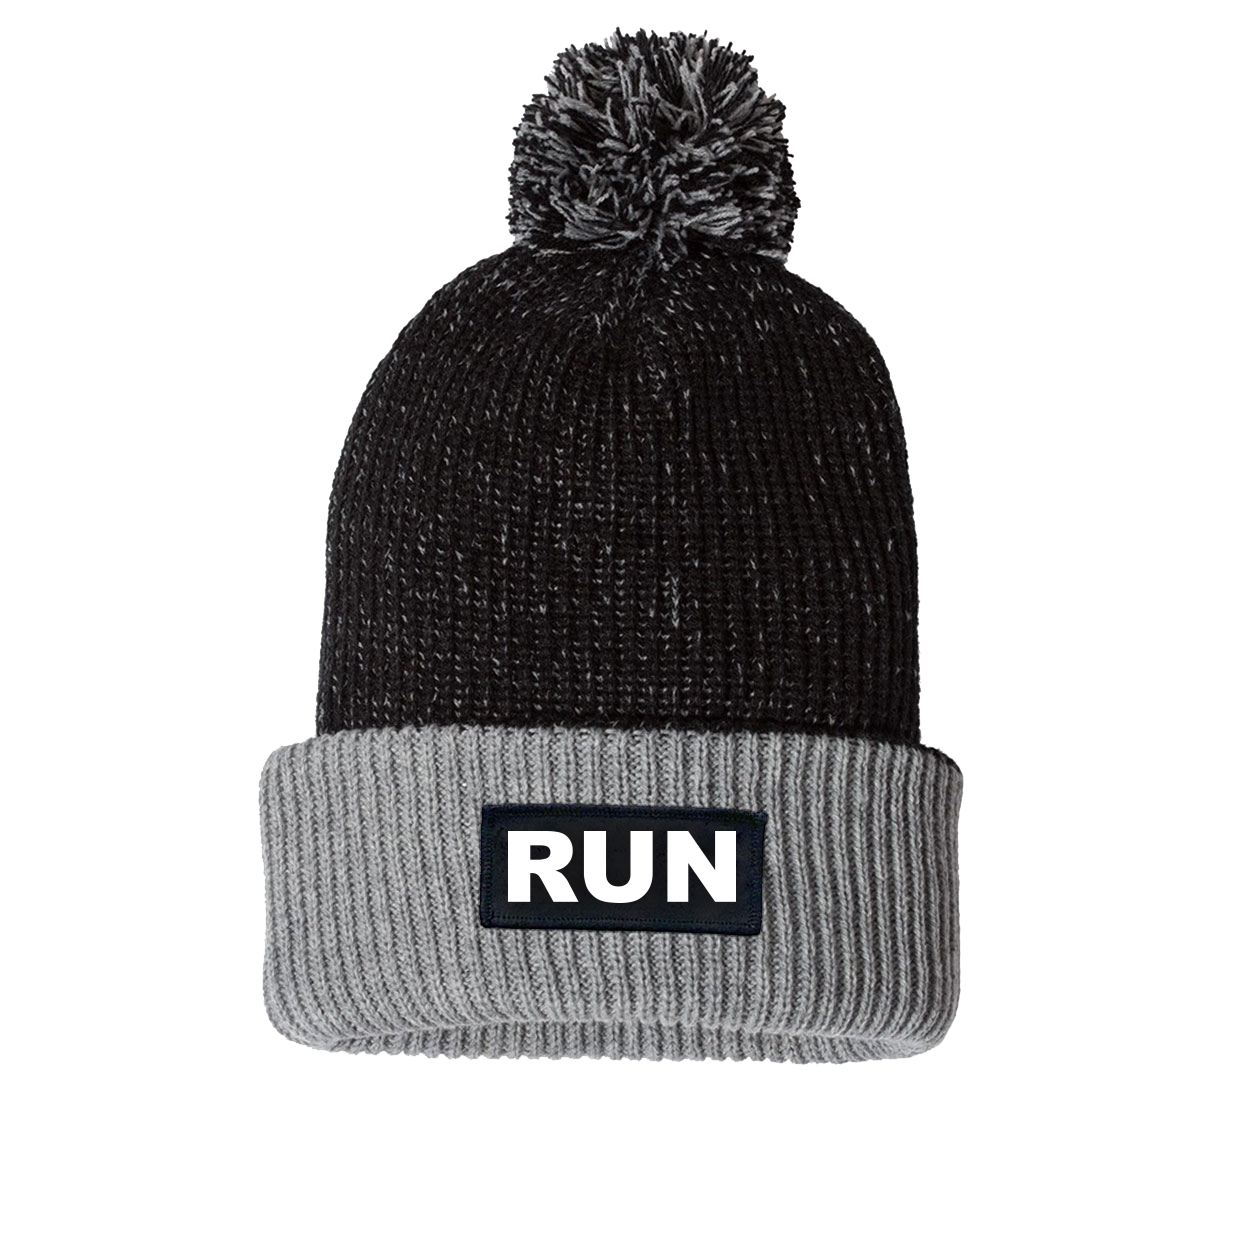 Run Brand Logo Night Out Woven Patch Roll Up Pom Knit Beanie Black/Gray